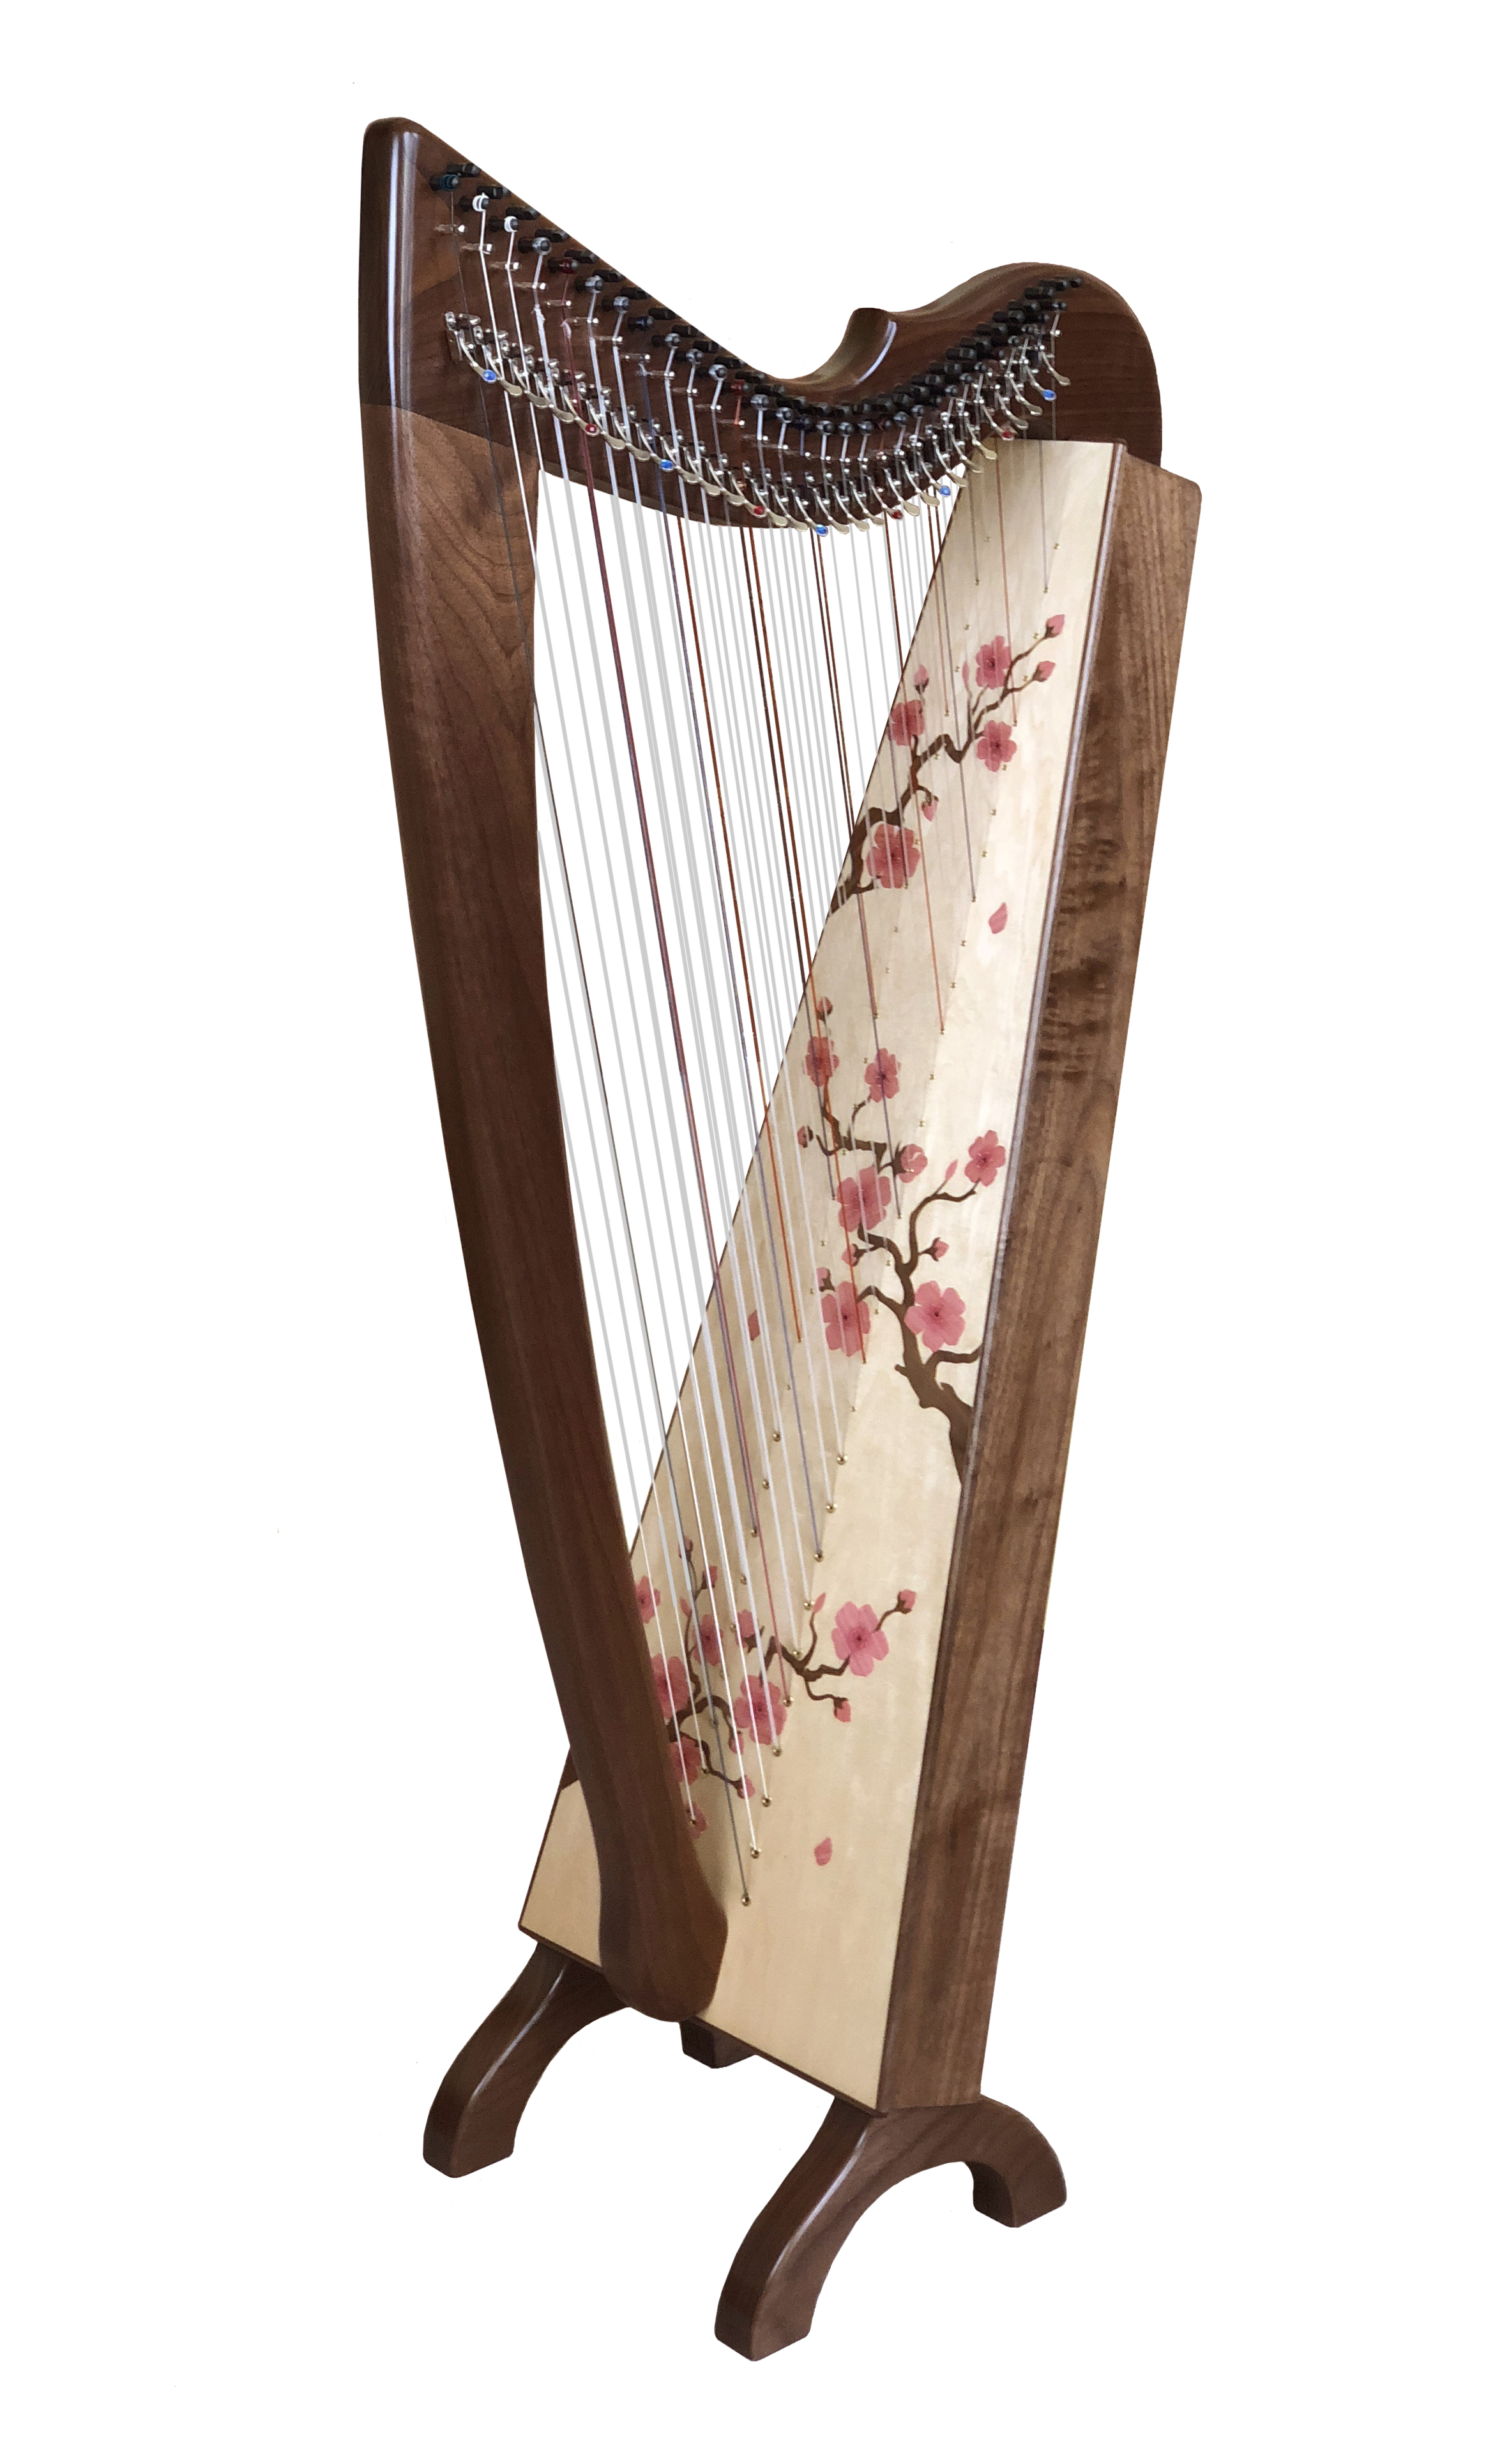 Rees Double Shaylee Meadows Harp (Copy)